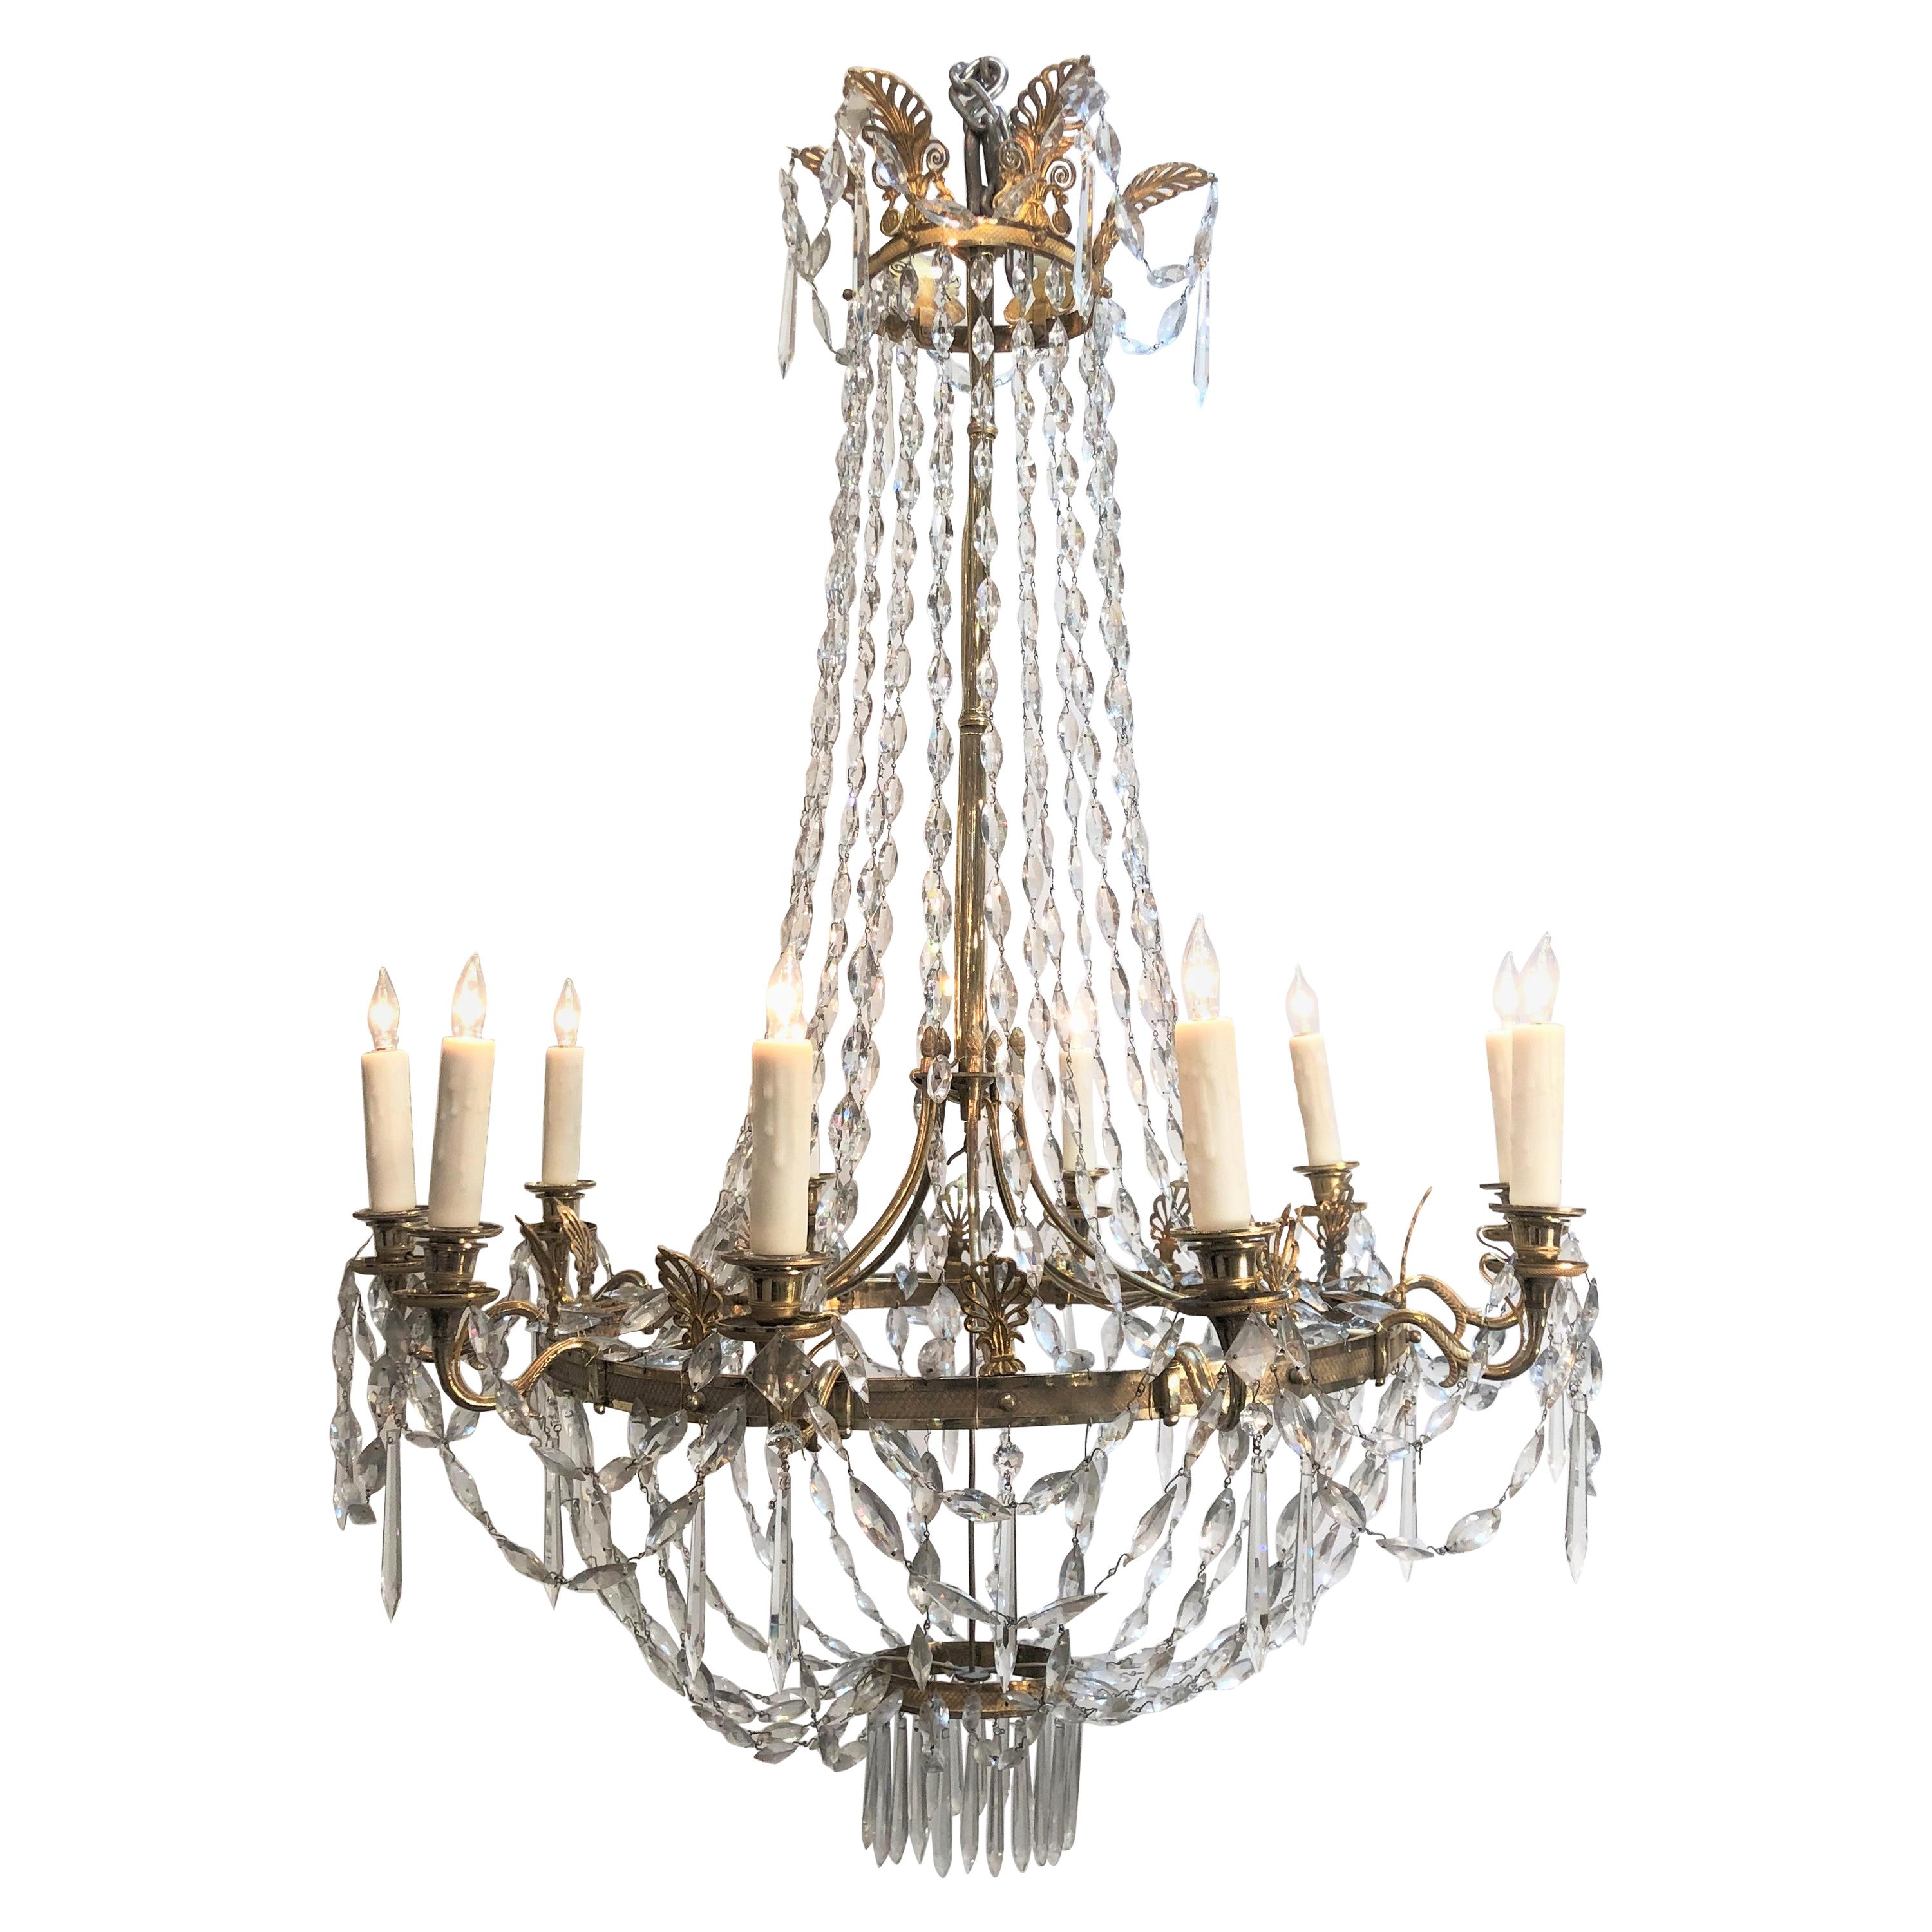 French Directoire Bronze and Crystal Chandelier, 18th Century